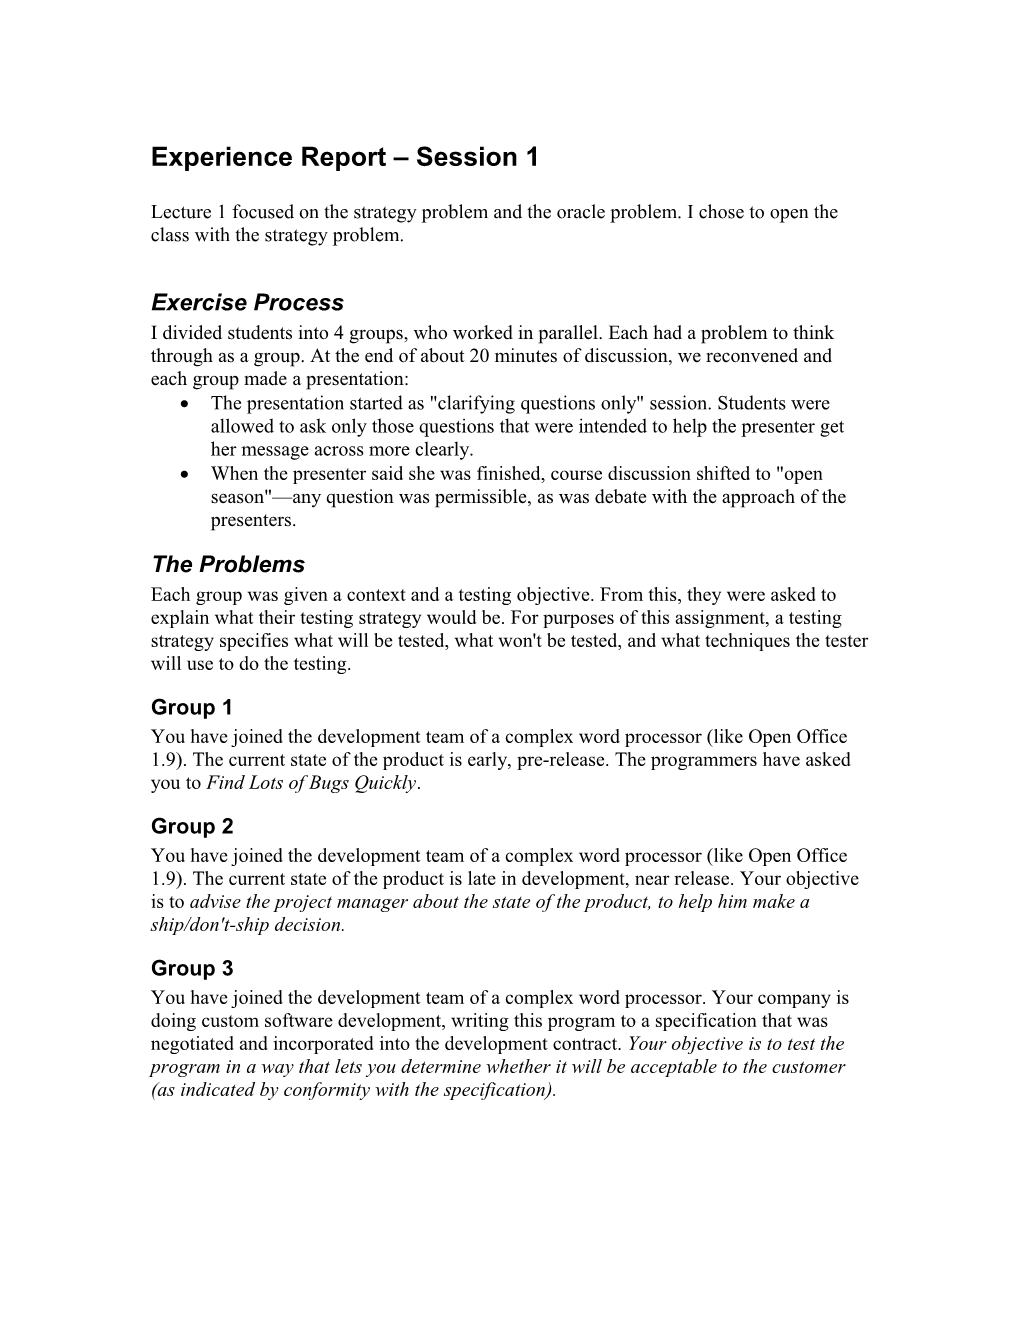 Experience Report Session 1